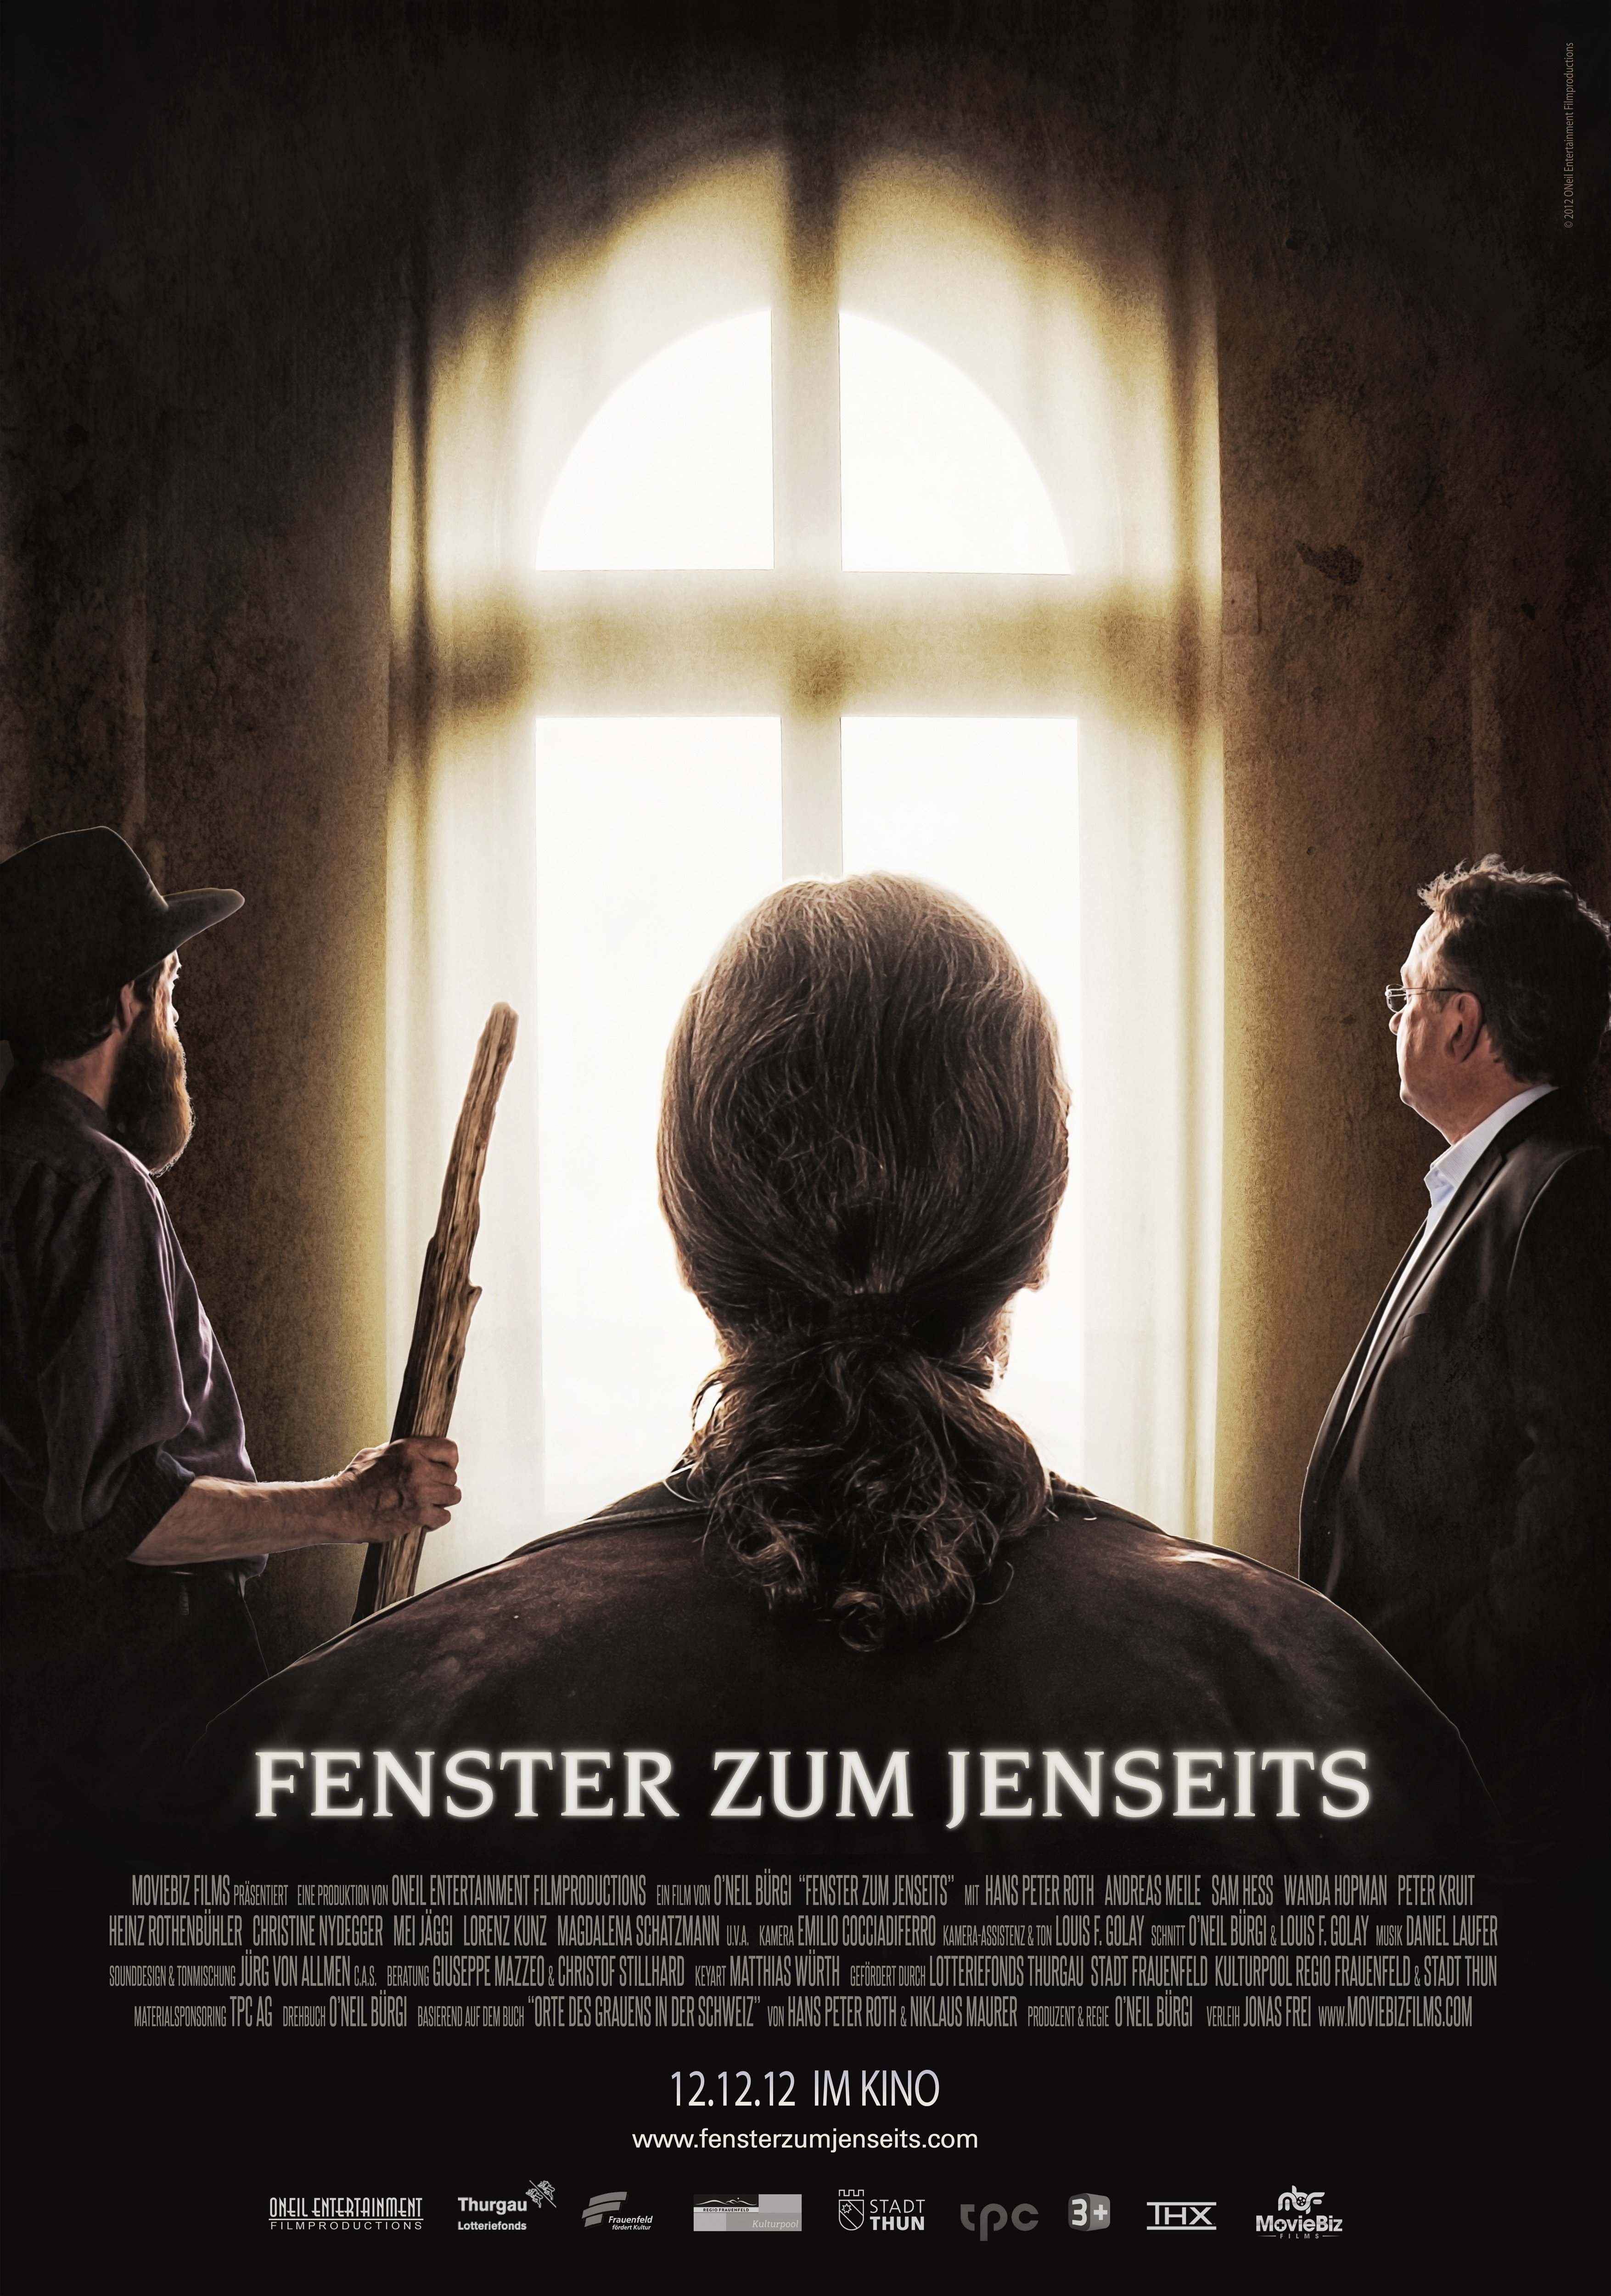 Andreas Meile, Hans Peter Roth and Sam Hess in Fenster zum Jenseits (2012)